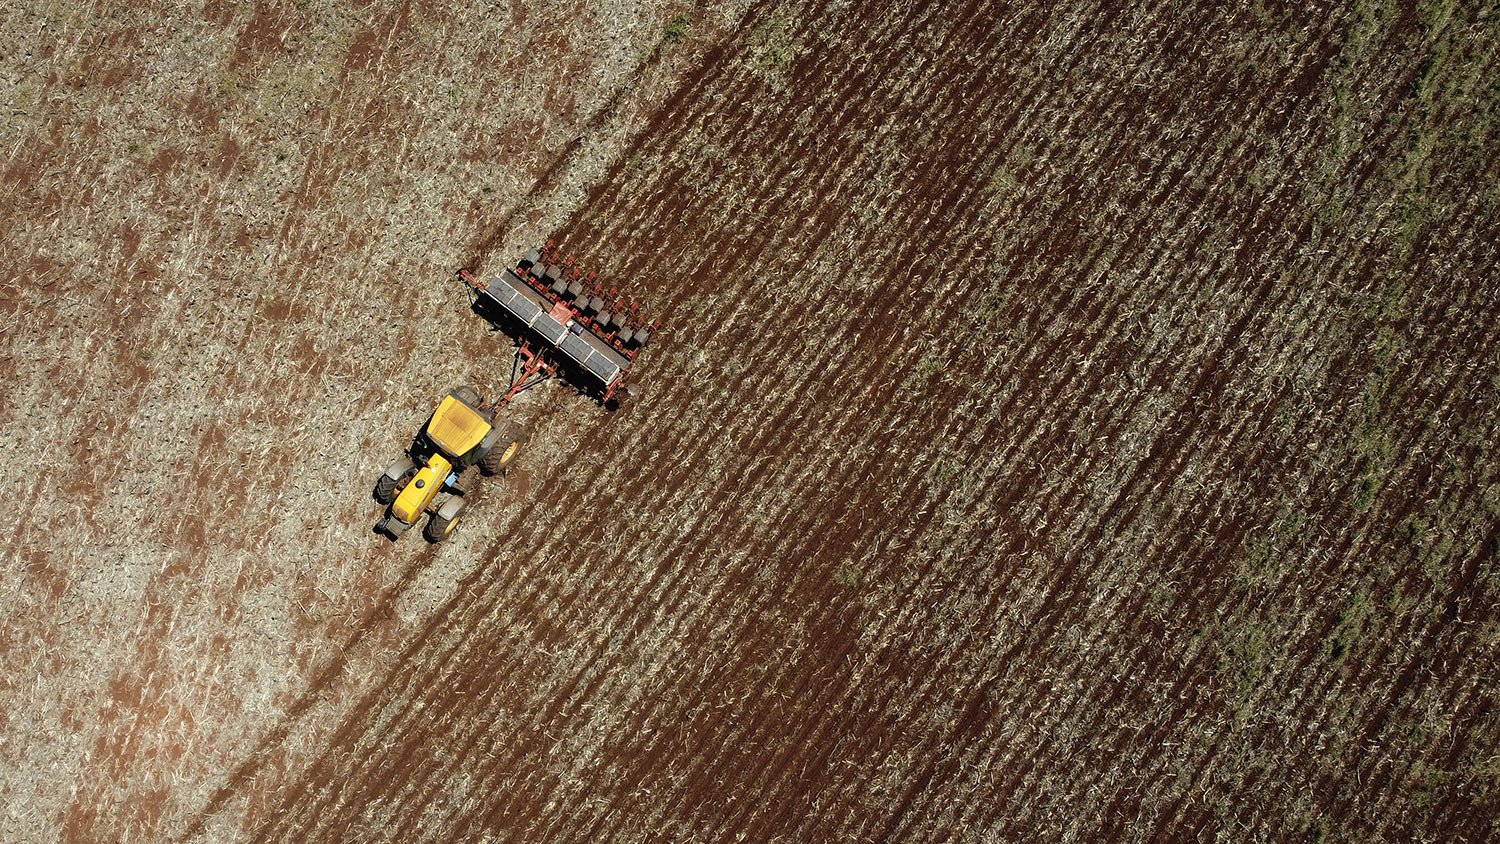  An agricultural machine plant soybeans on a farm in a rural area of Sidrolandia, Mato Grosso do Sul state, Brazil, Saturday, Oct. 22, 2022. (AP Photo/Eraldo Peres) 